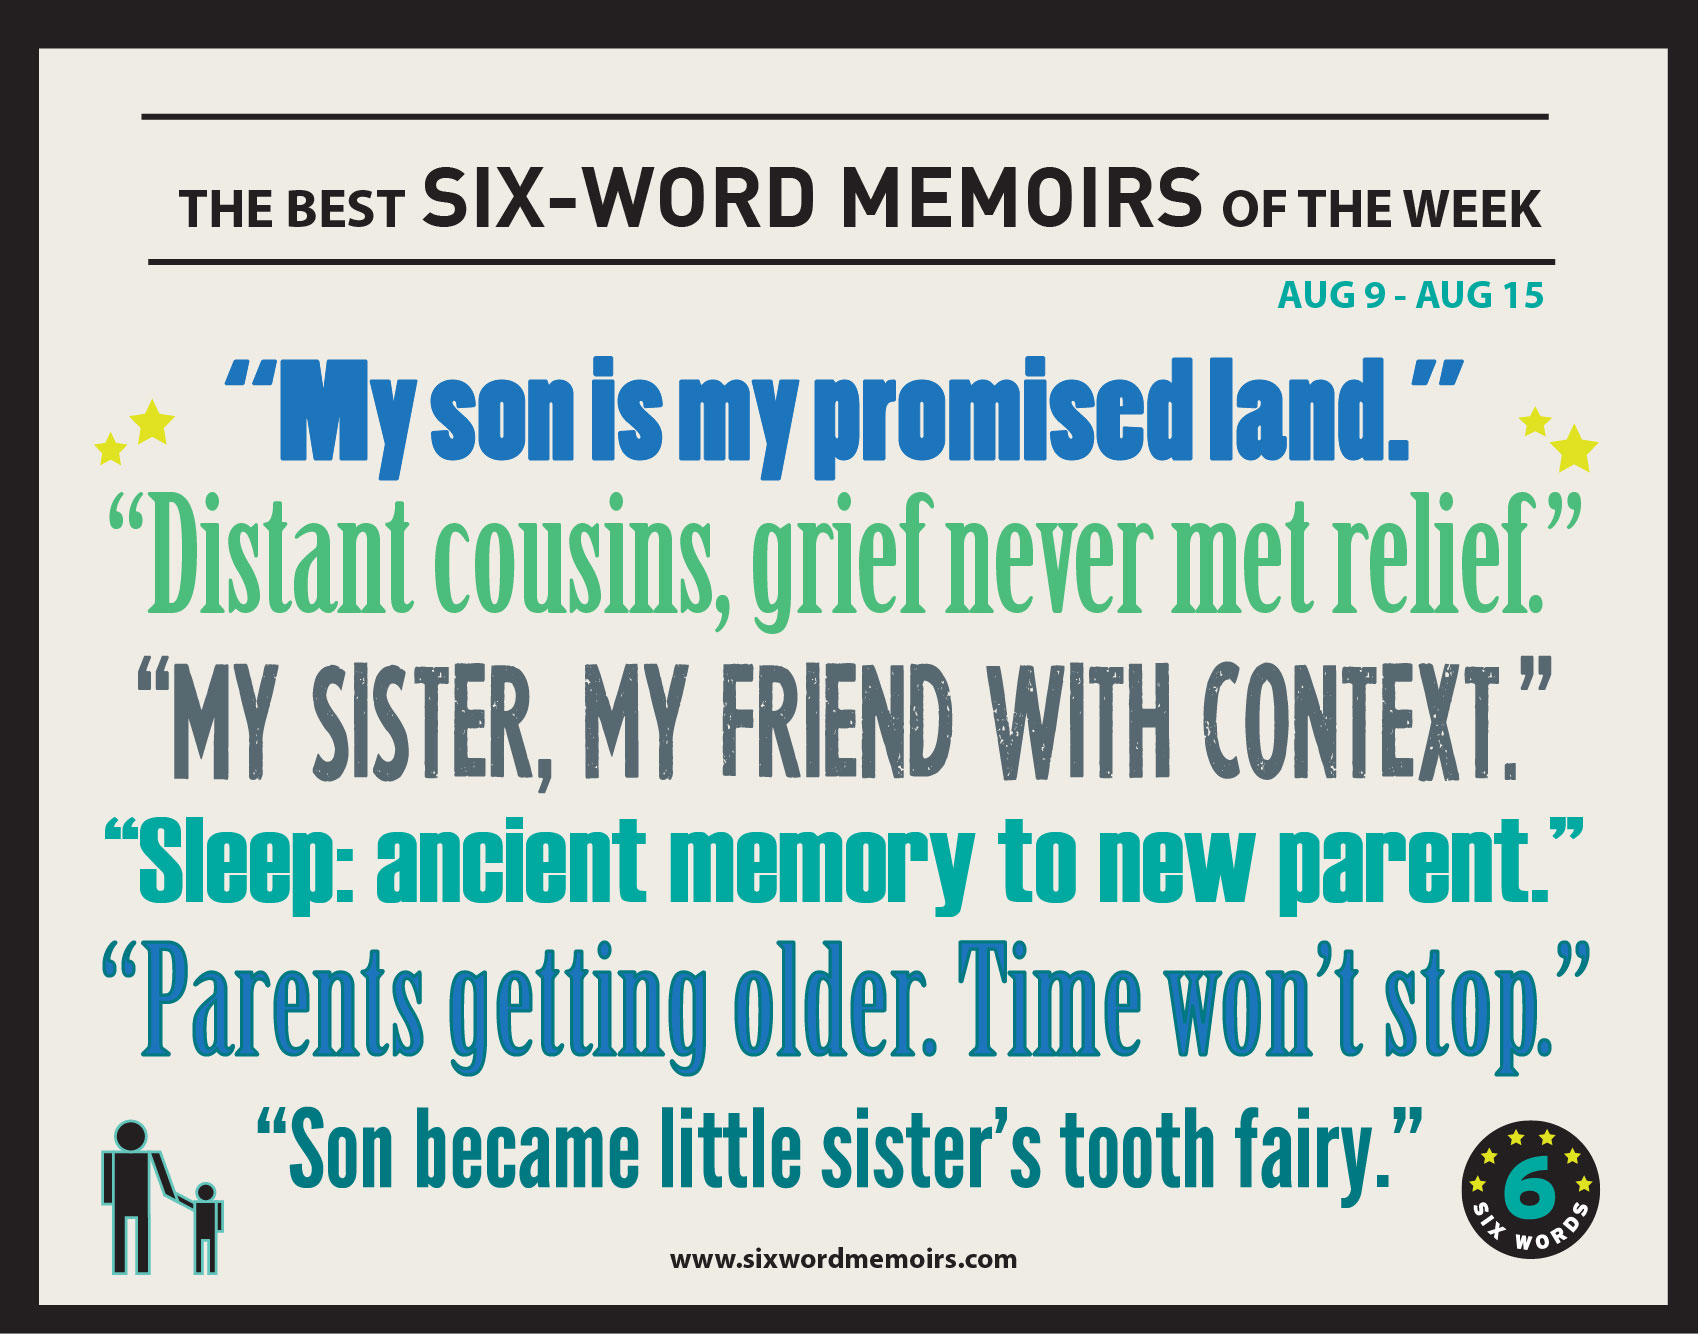 6 Words Memoir. Six Word Memoirs School year. Six-Word Memoir that reflects what you prioritize in role. 6 words текст